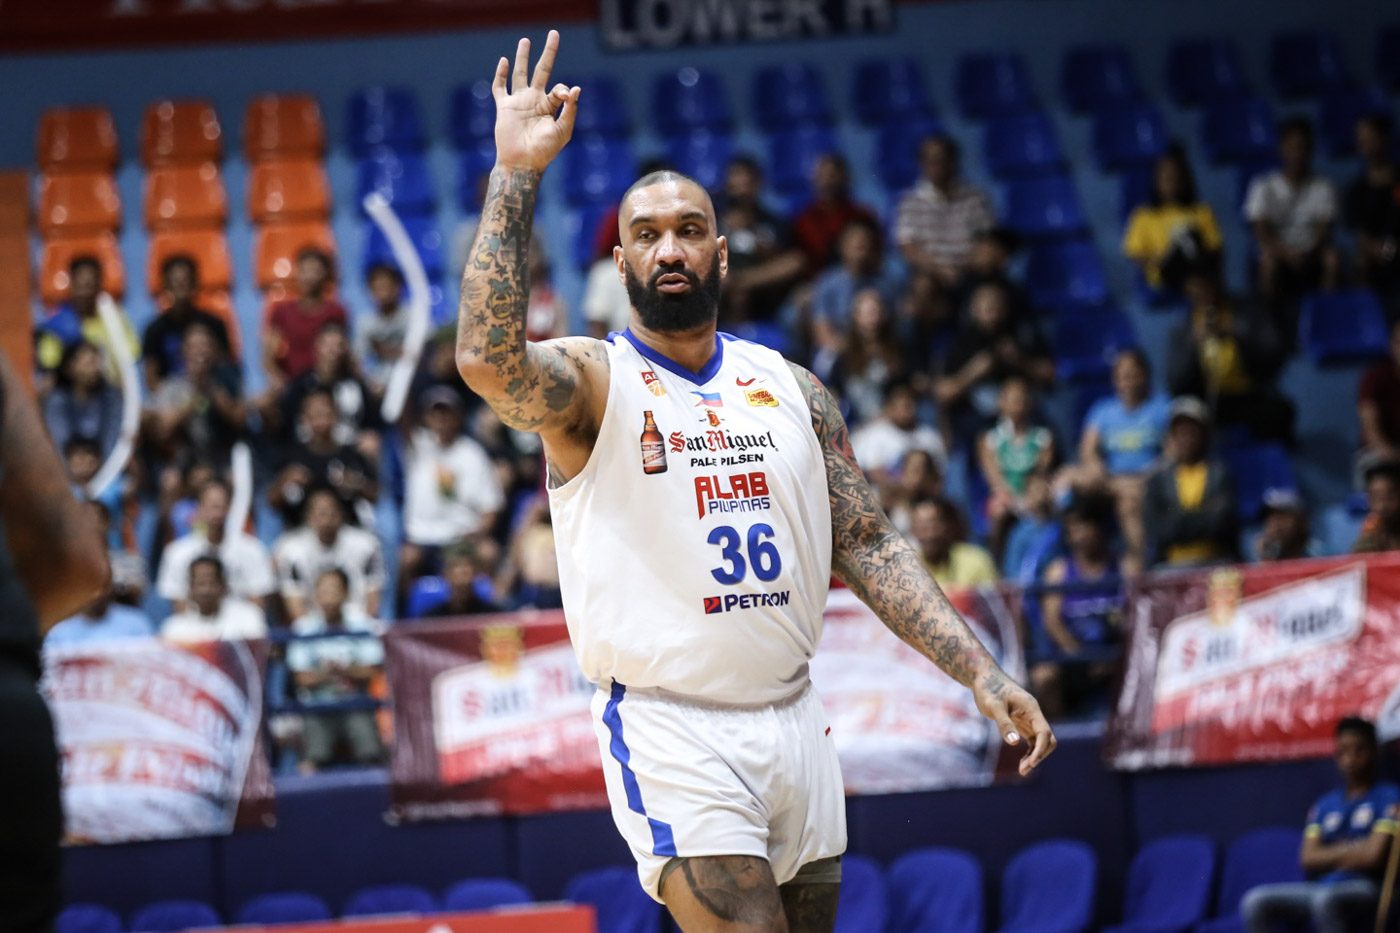 Taiwan’s Formosa outlasts banged-up Alab Pilipinas